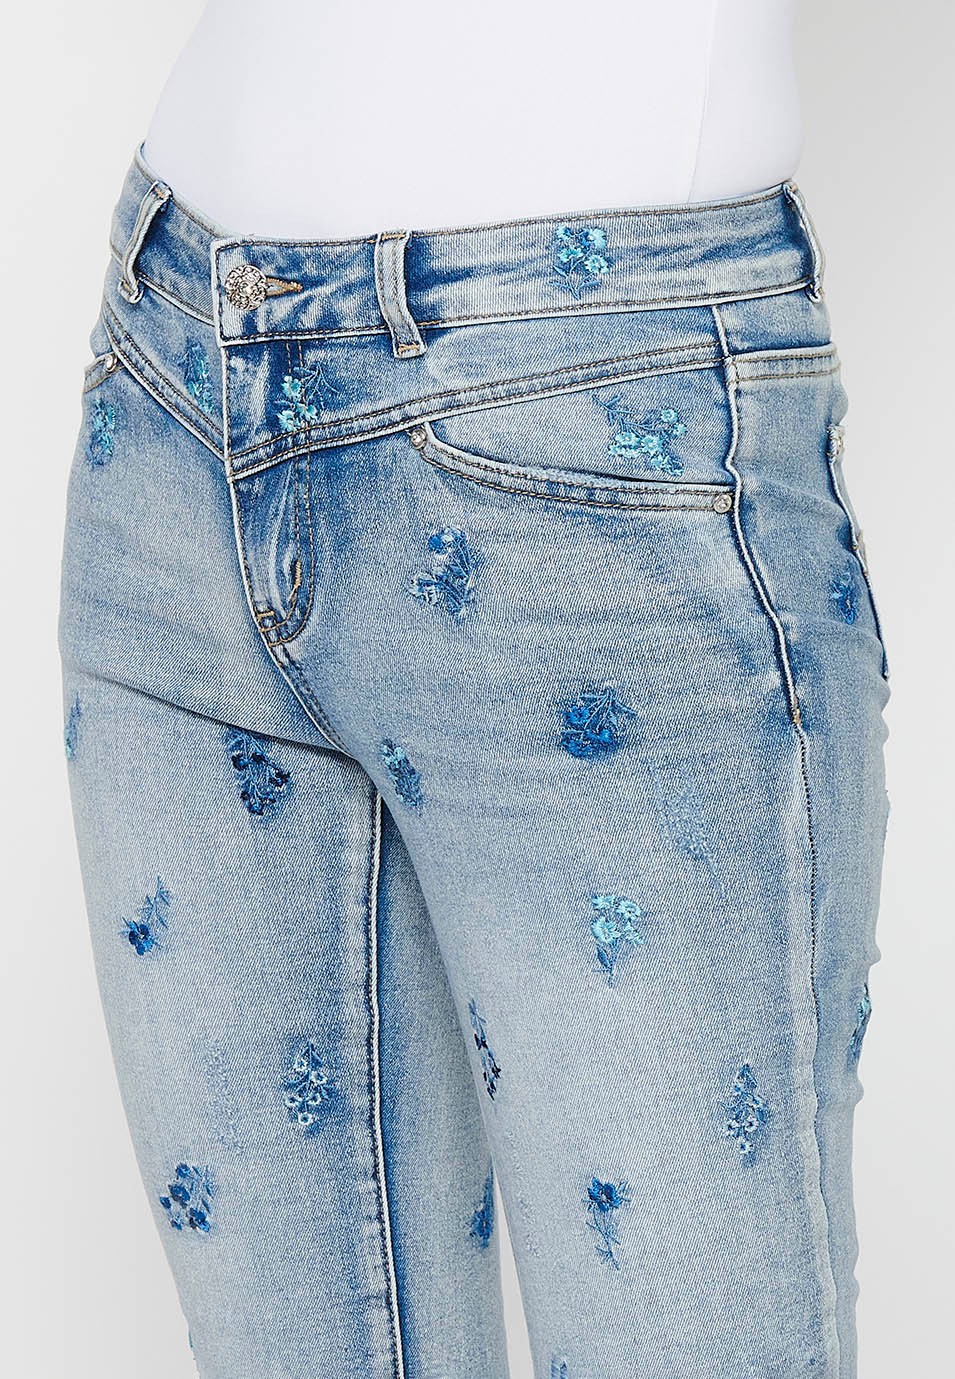 Slim long pants with front zipper and button closure with floral embroidery in Light Blue for Women 5